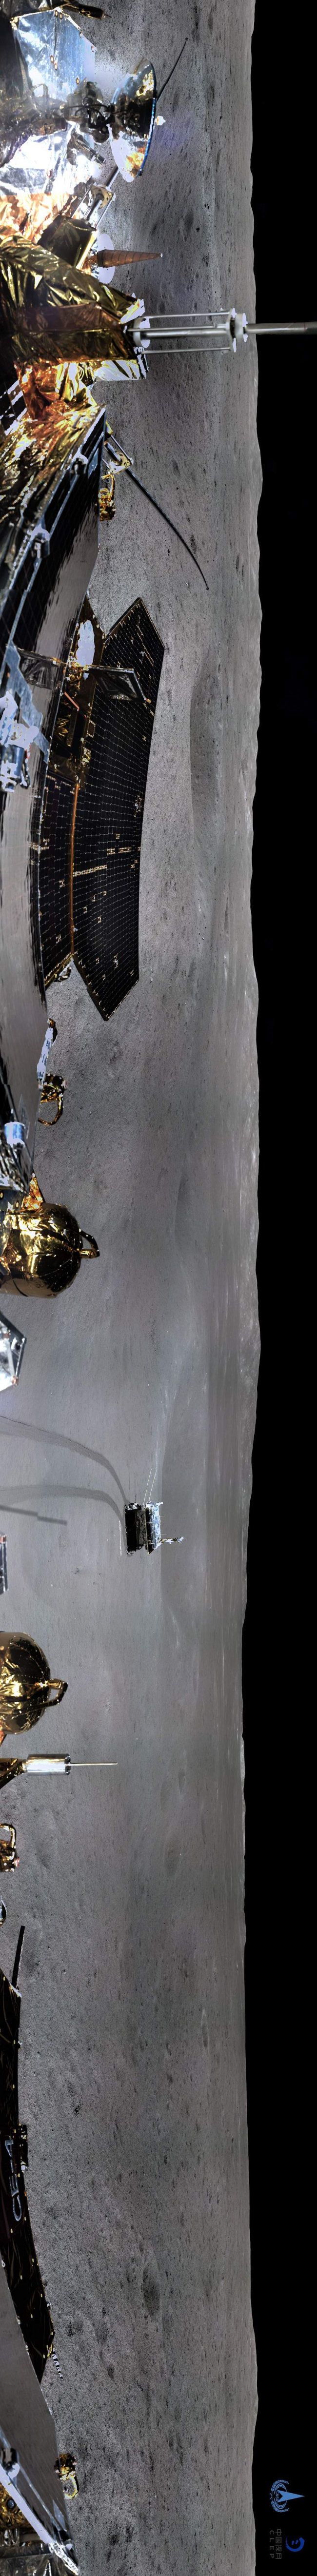 China's Chang'e-4 probe took panoramic photos on the lunar surface after it successfully made the first ever soft-landing on the far side of the moon. The China National Space Administration (CNSA) releases the 360-degree panoramic photos on Friday, Jan.11, 2019. [Photo: CNSA]